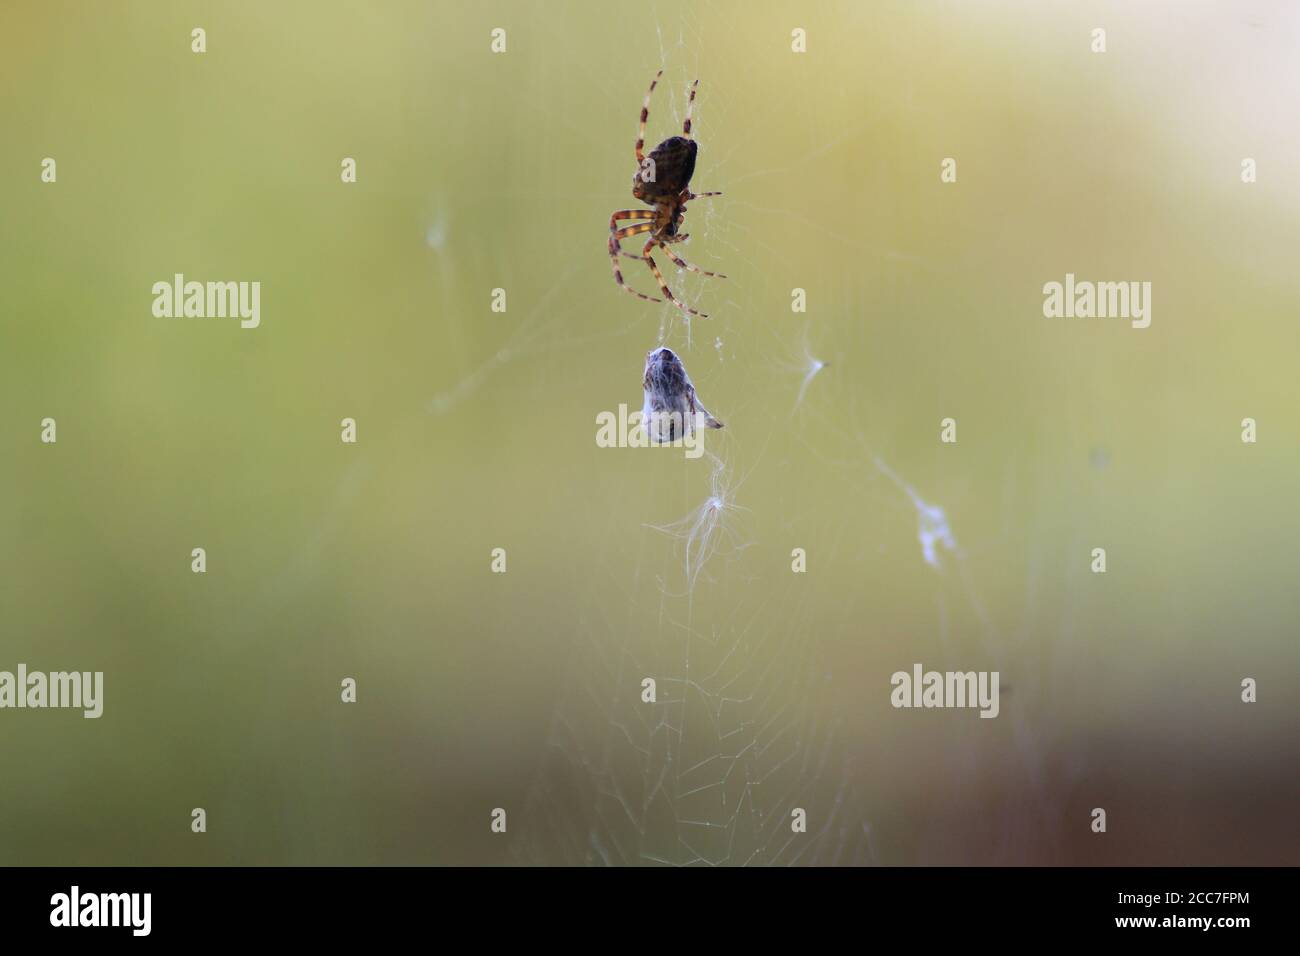 Fly Cocooned in Spiders Web Stock Photo